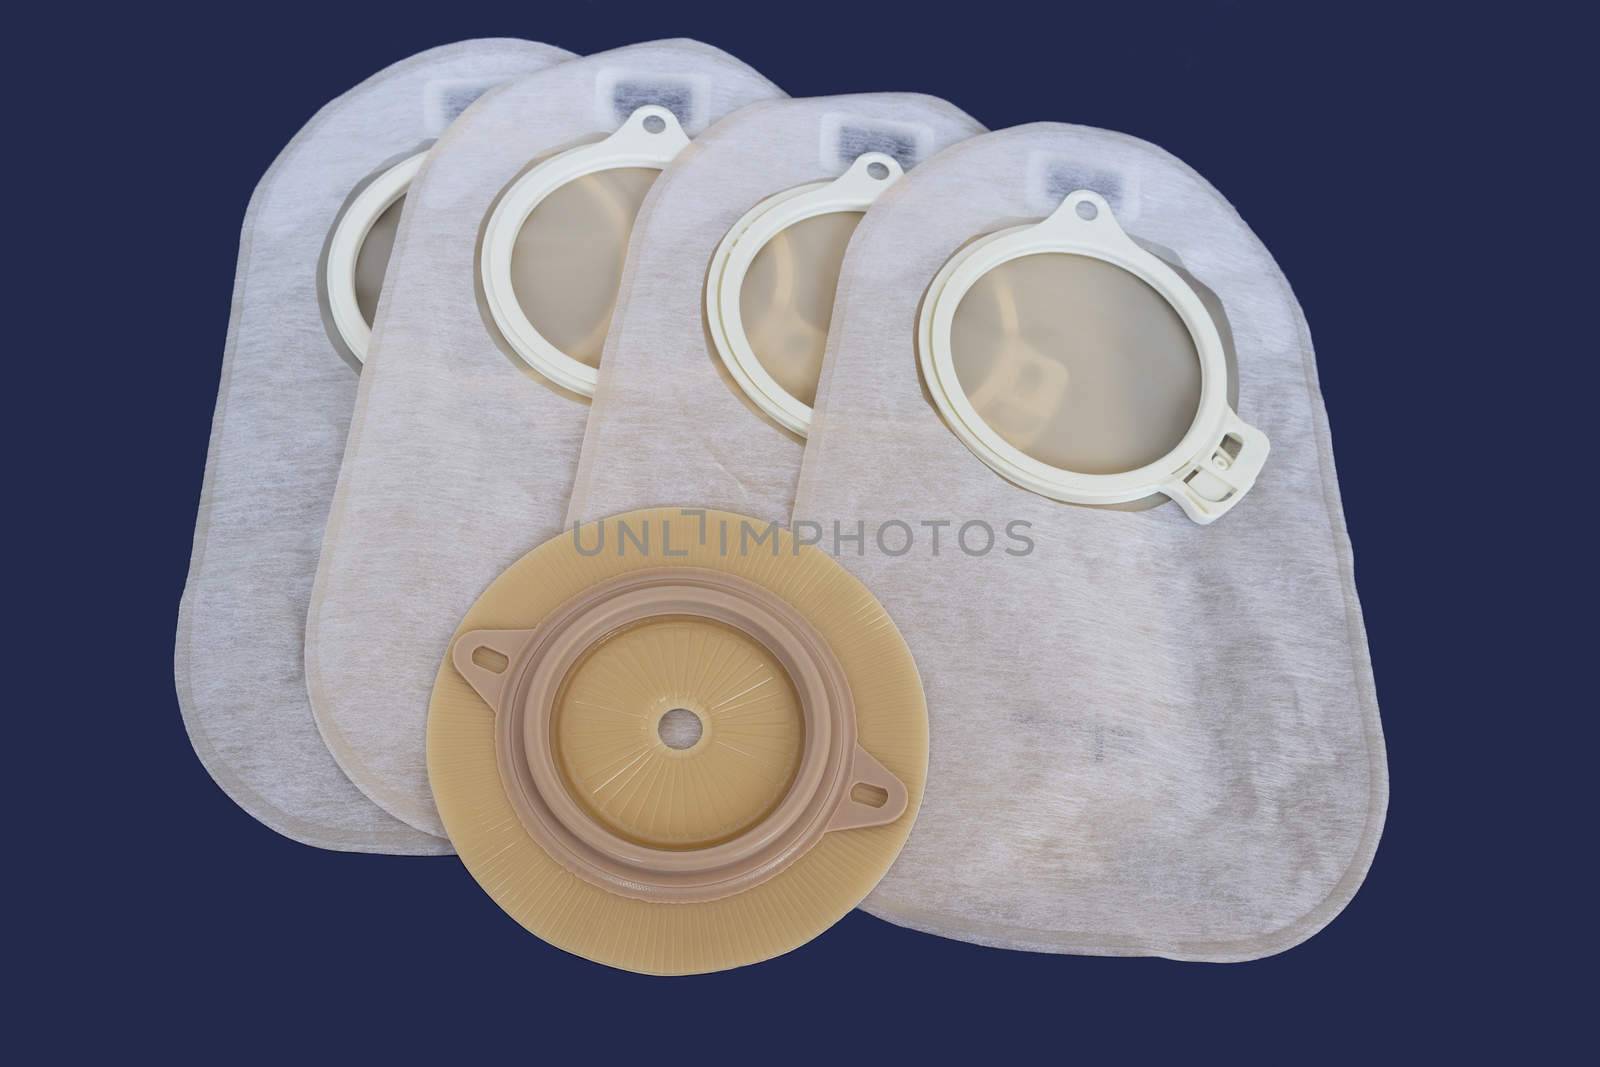 Accessory bag and disc for colostomy